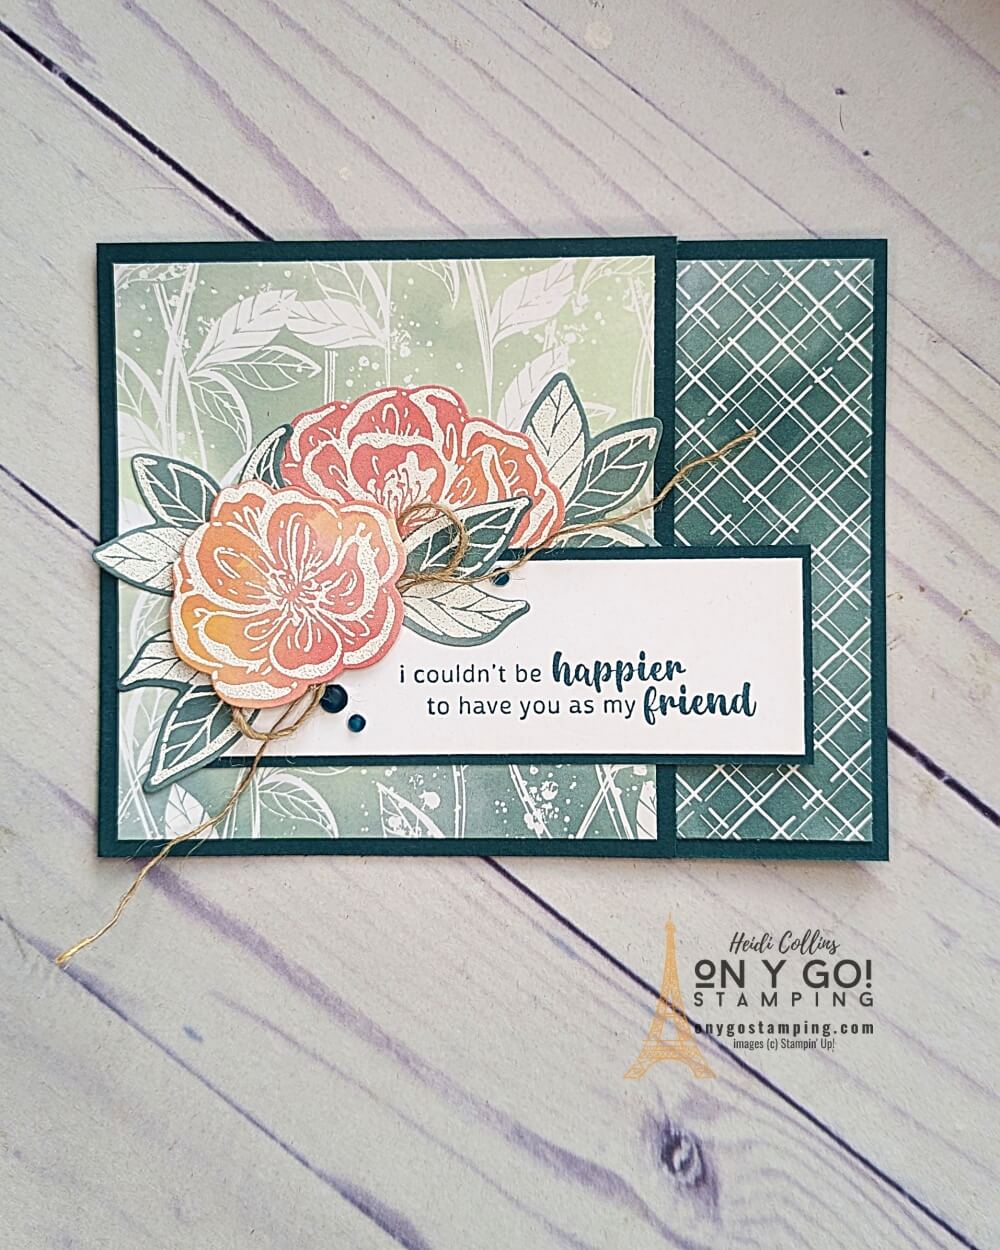 If you're looking for a quick and easy way to create an irresistible card design, then look no further than Stampin' Up!'s NEW 